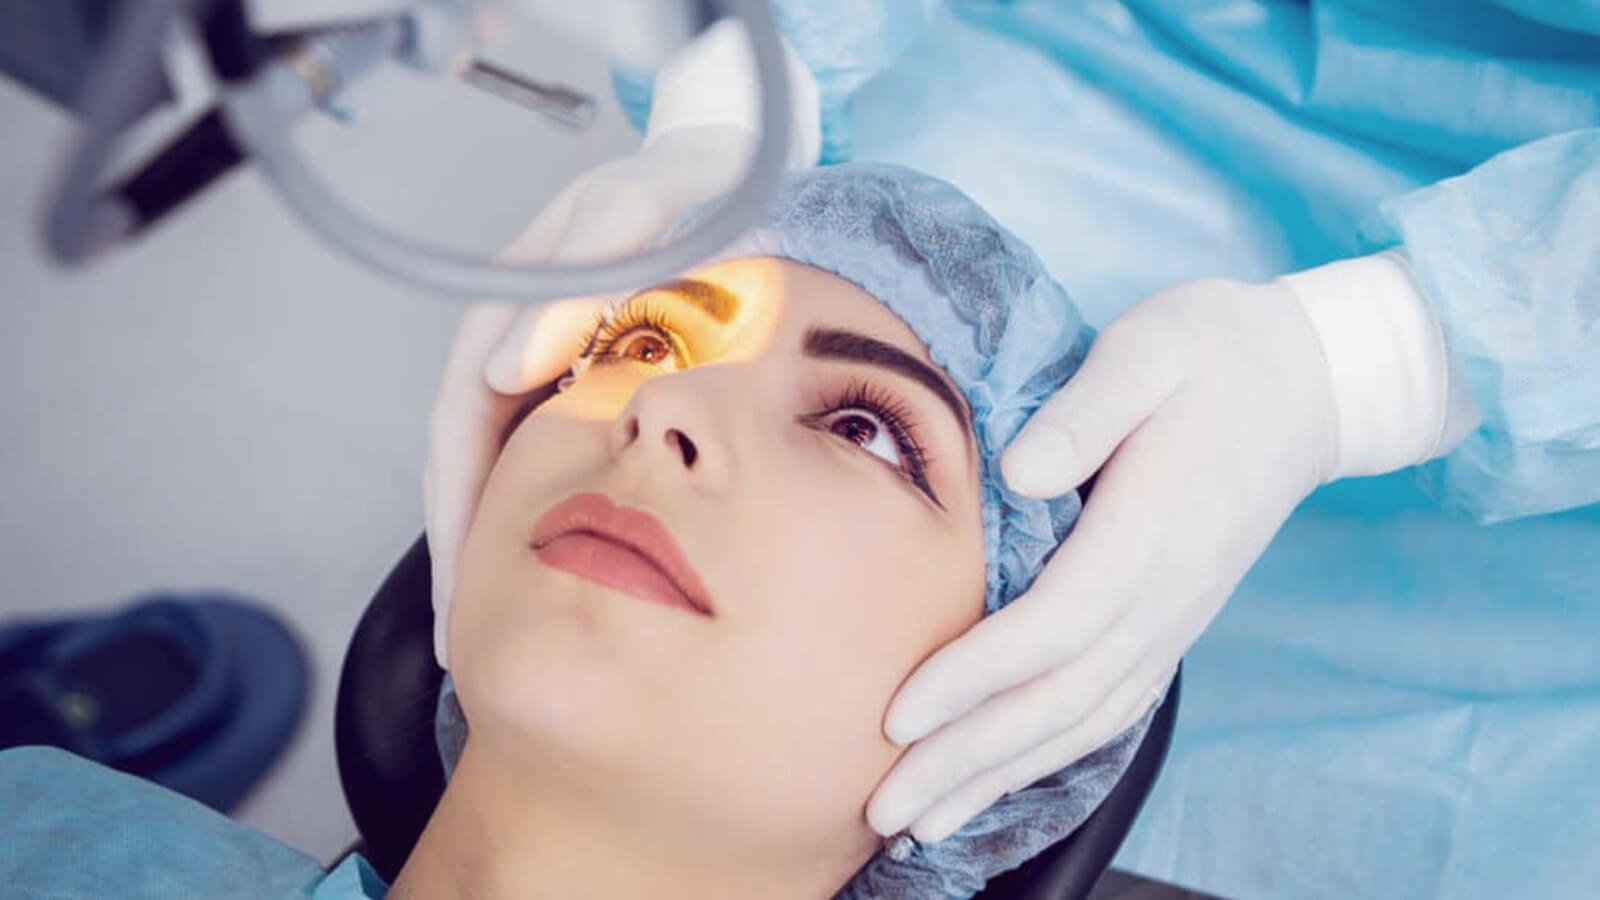 Eye Accidents or Surgery